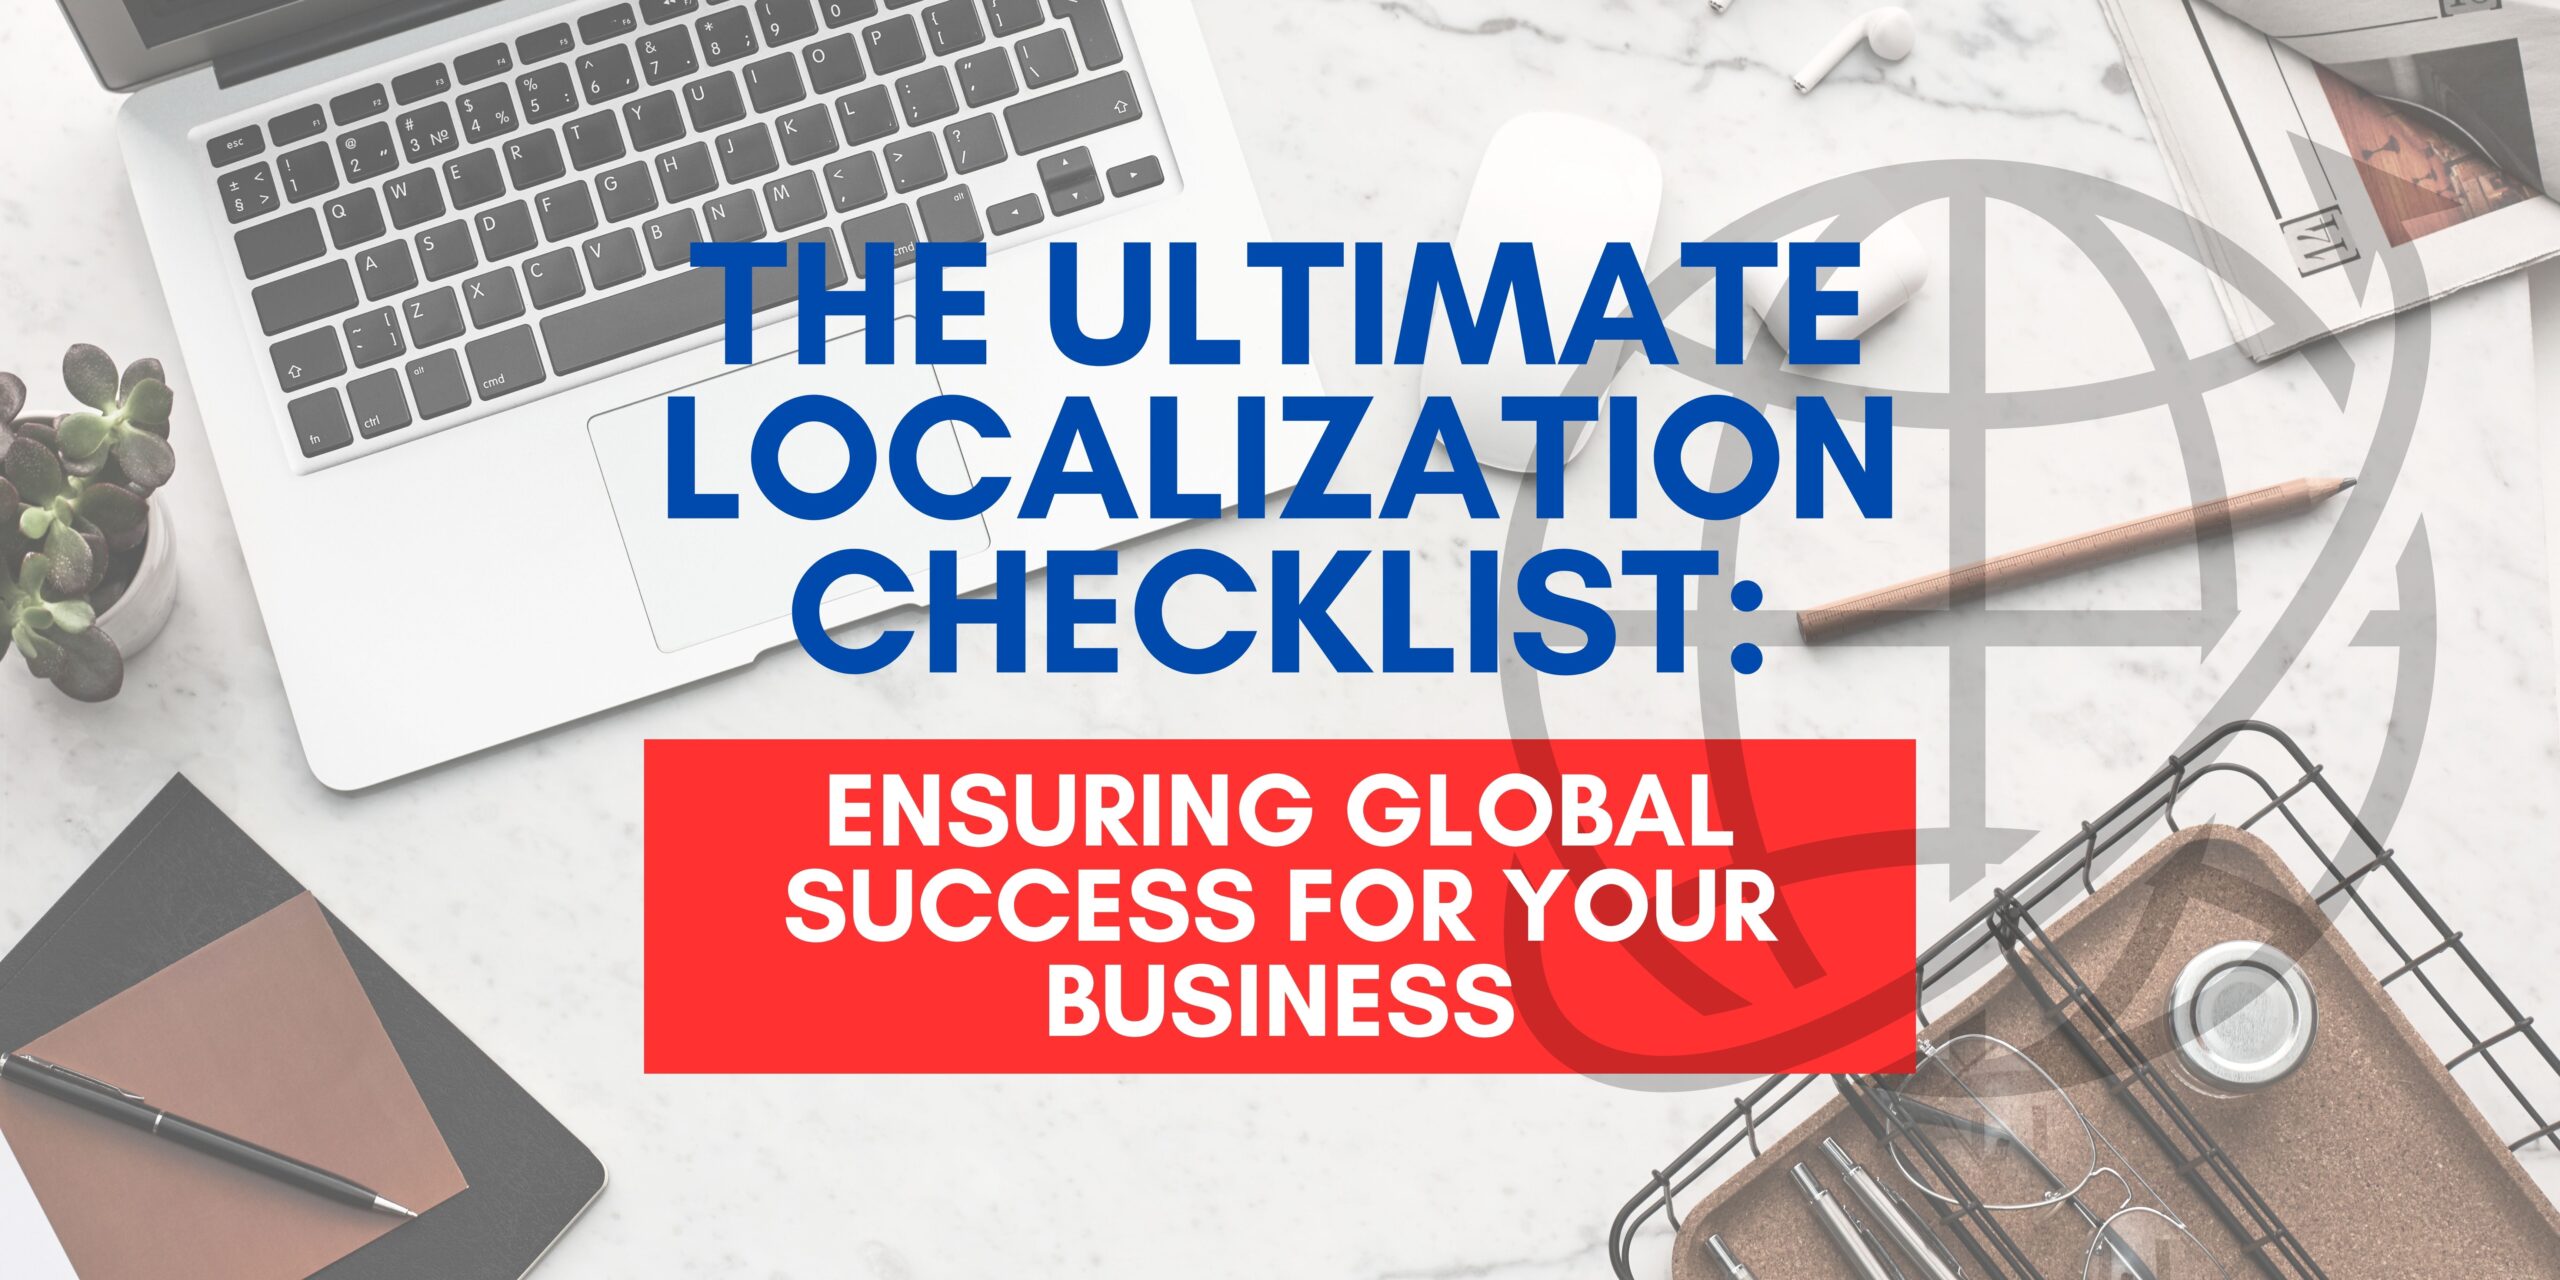 The Ultimate Localization Checklist Ensuring Global Success for Your Business